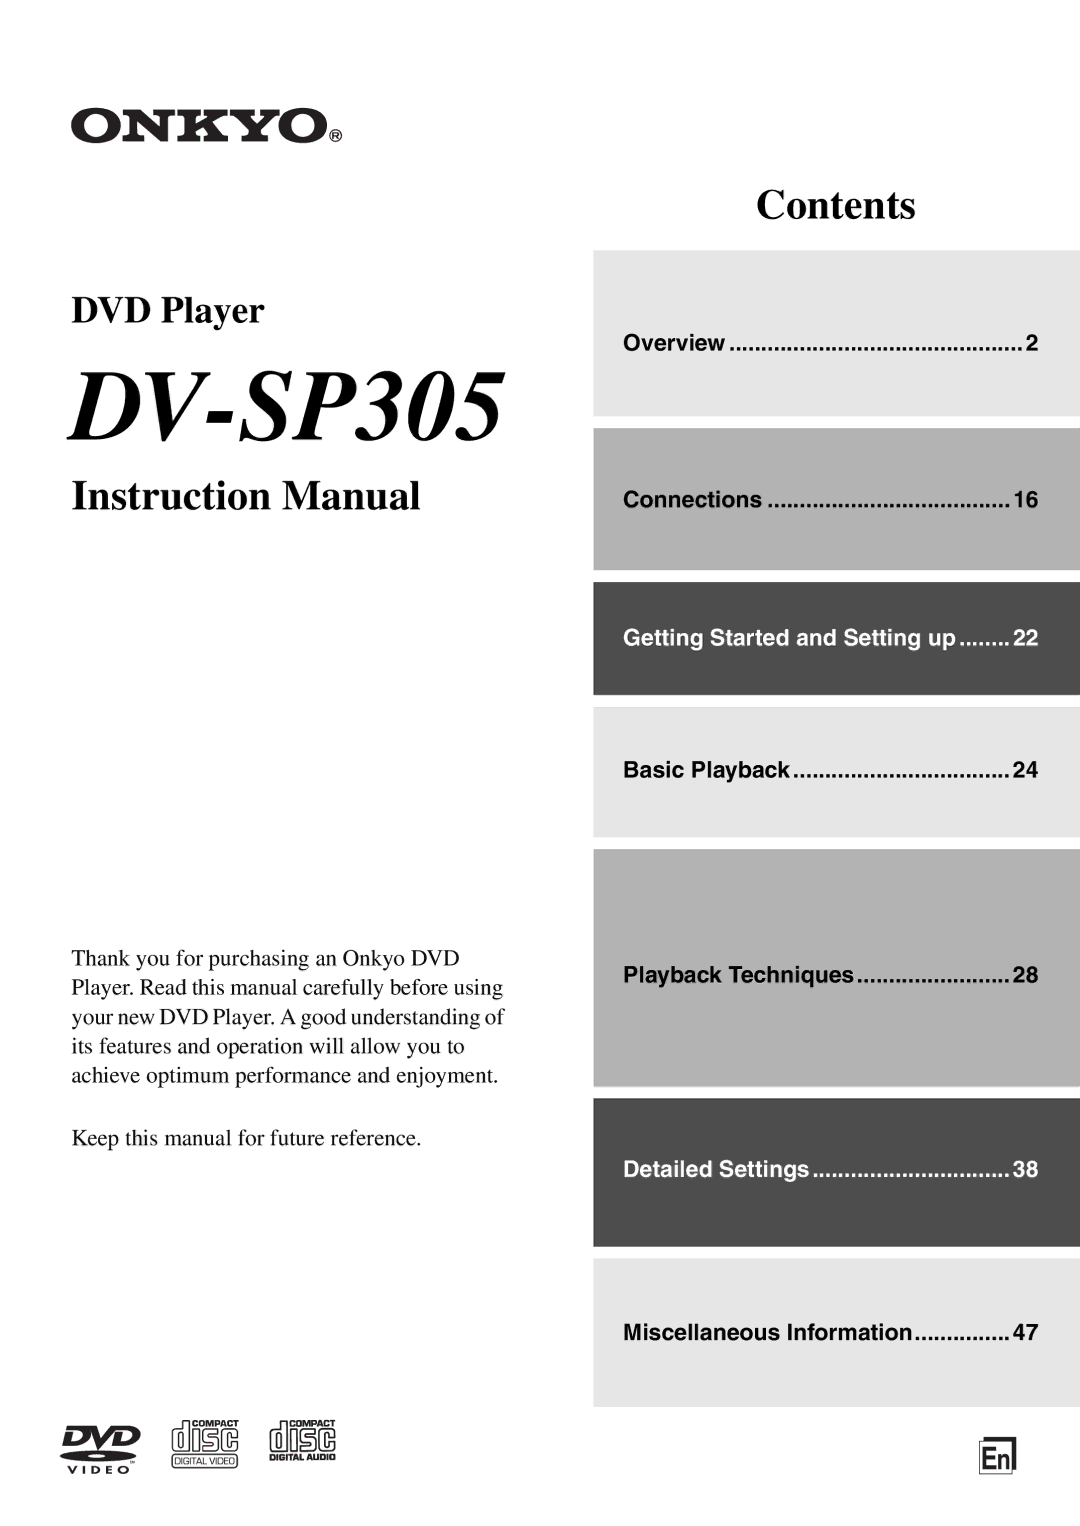 Onkyo DV-SP305 instruction manual Connections, Basic Playback, Miscellaneous Information 